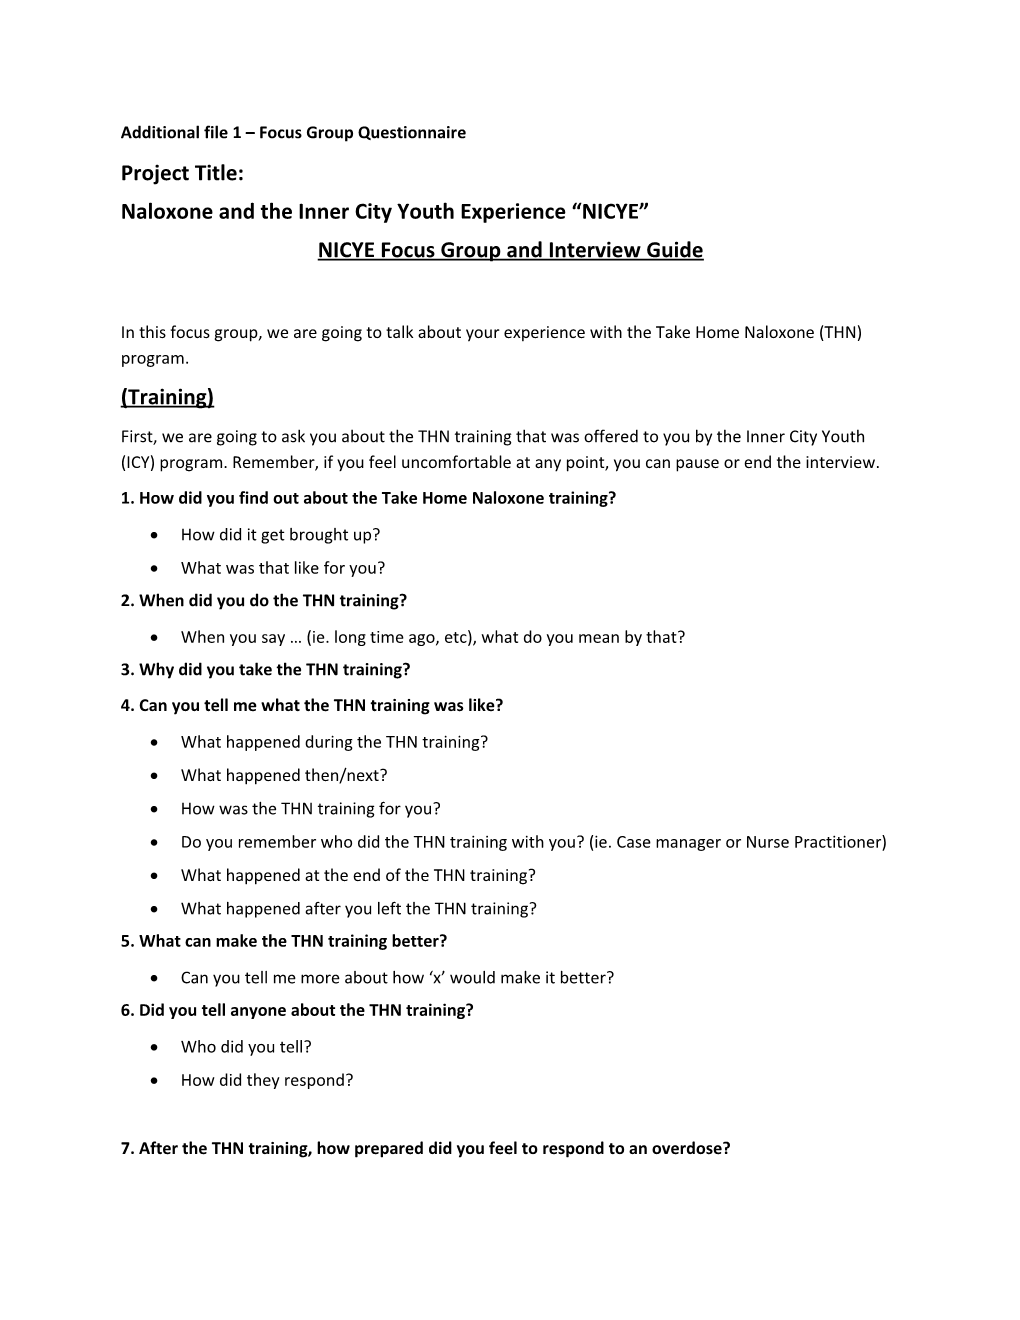 Additional File 1 Focus Group Questionnaire